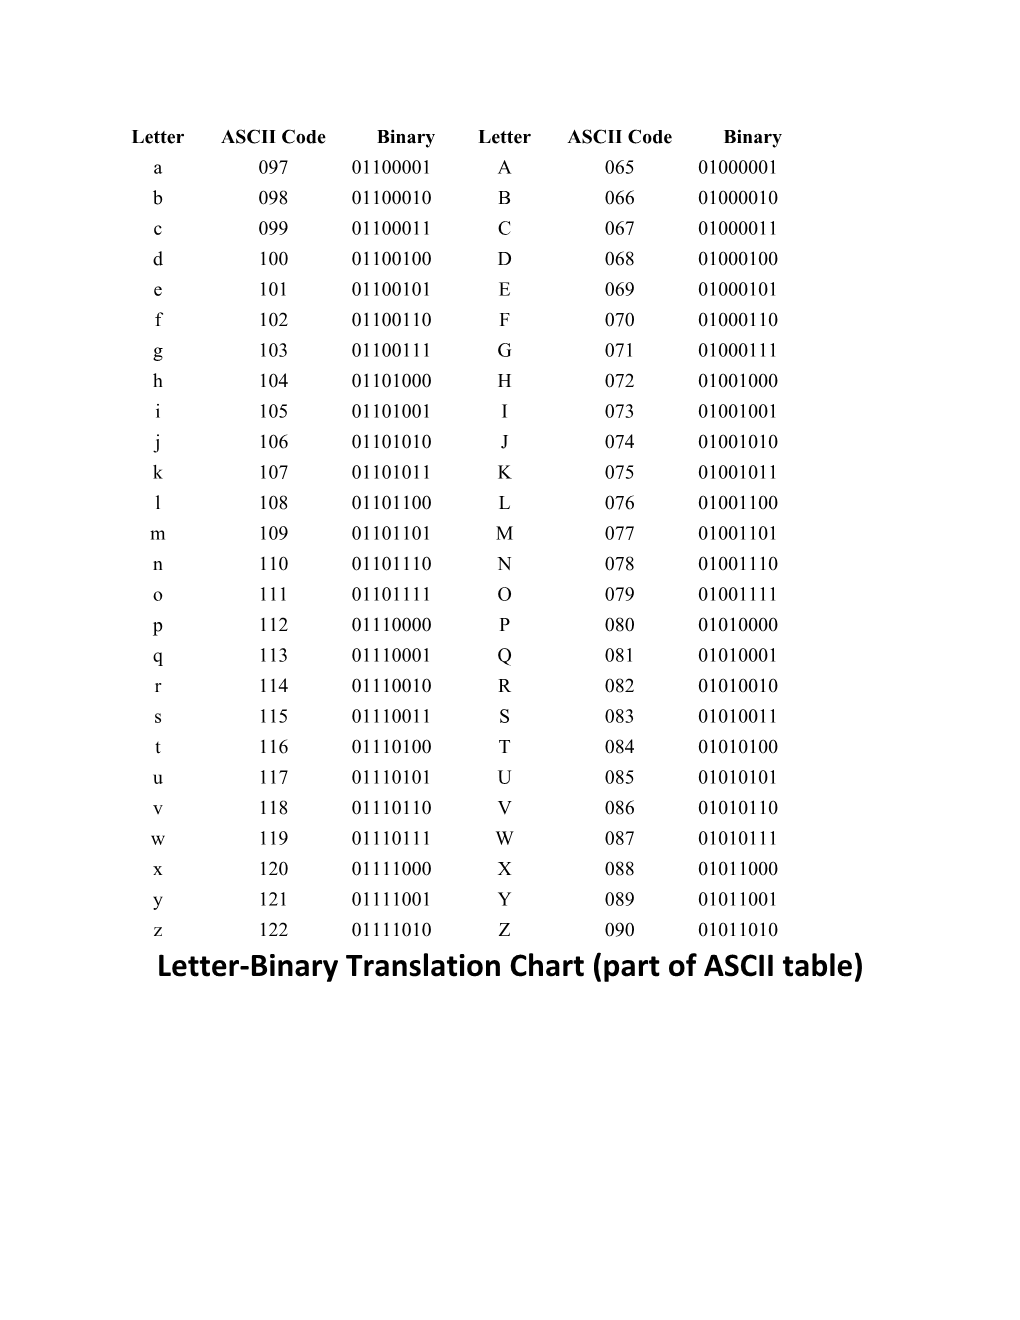 Letter-Binary Translation Chart (Part of ASCII Table)